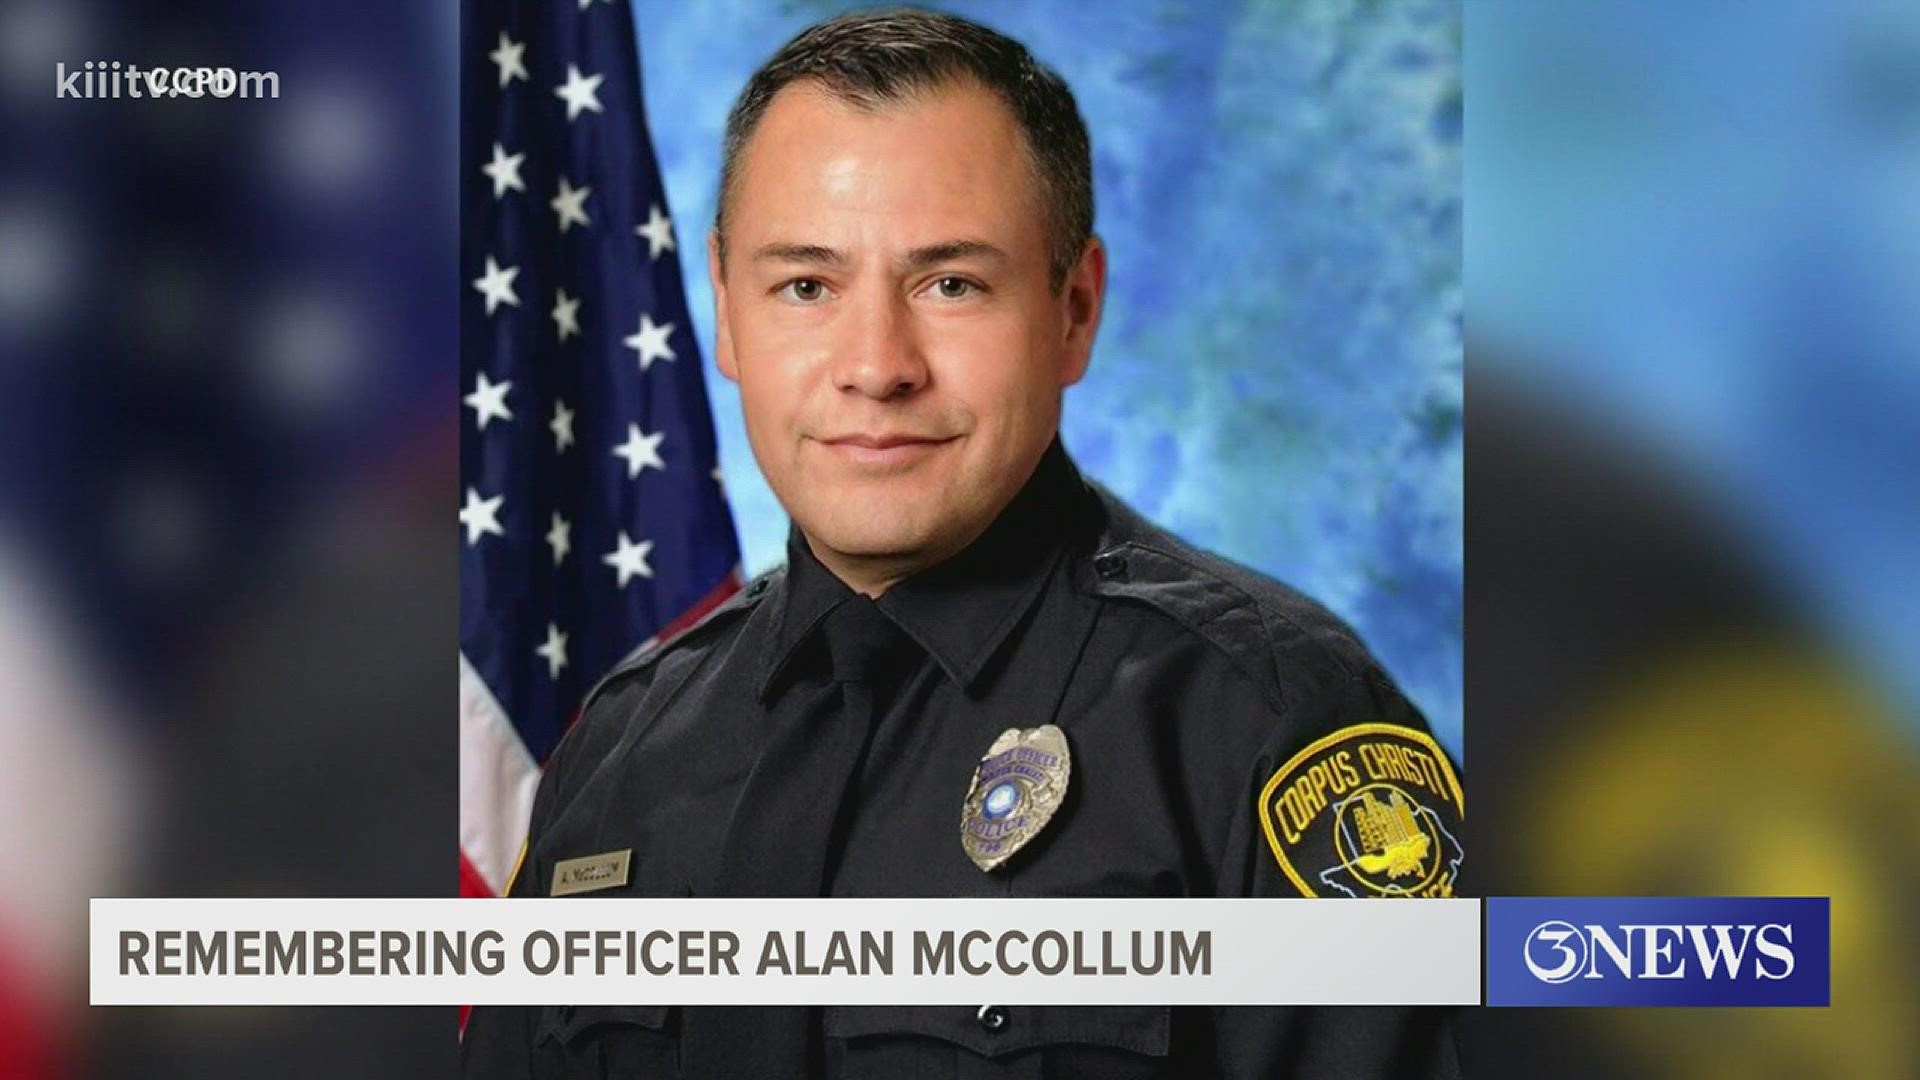 As we pass the two year anniversary of Officer McCollum's death in the line of duty, we remember his service.